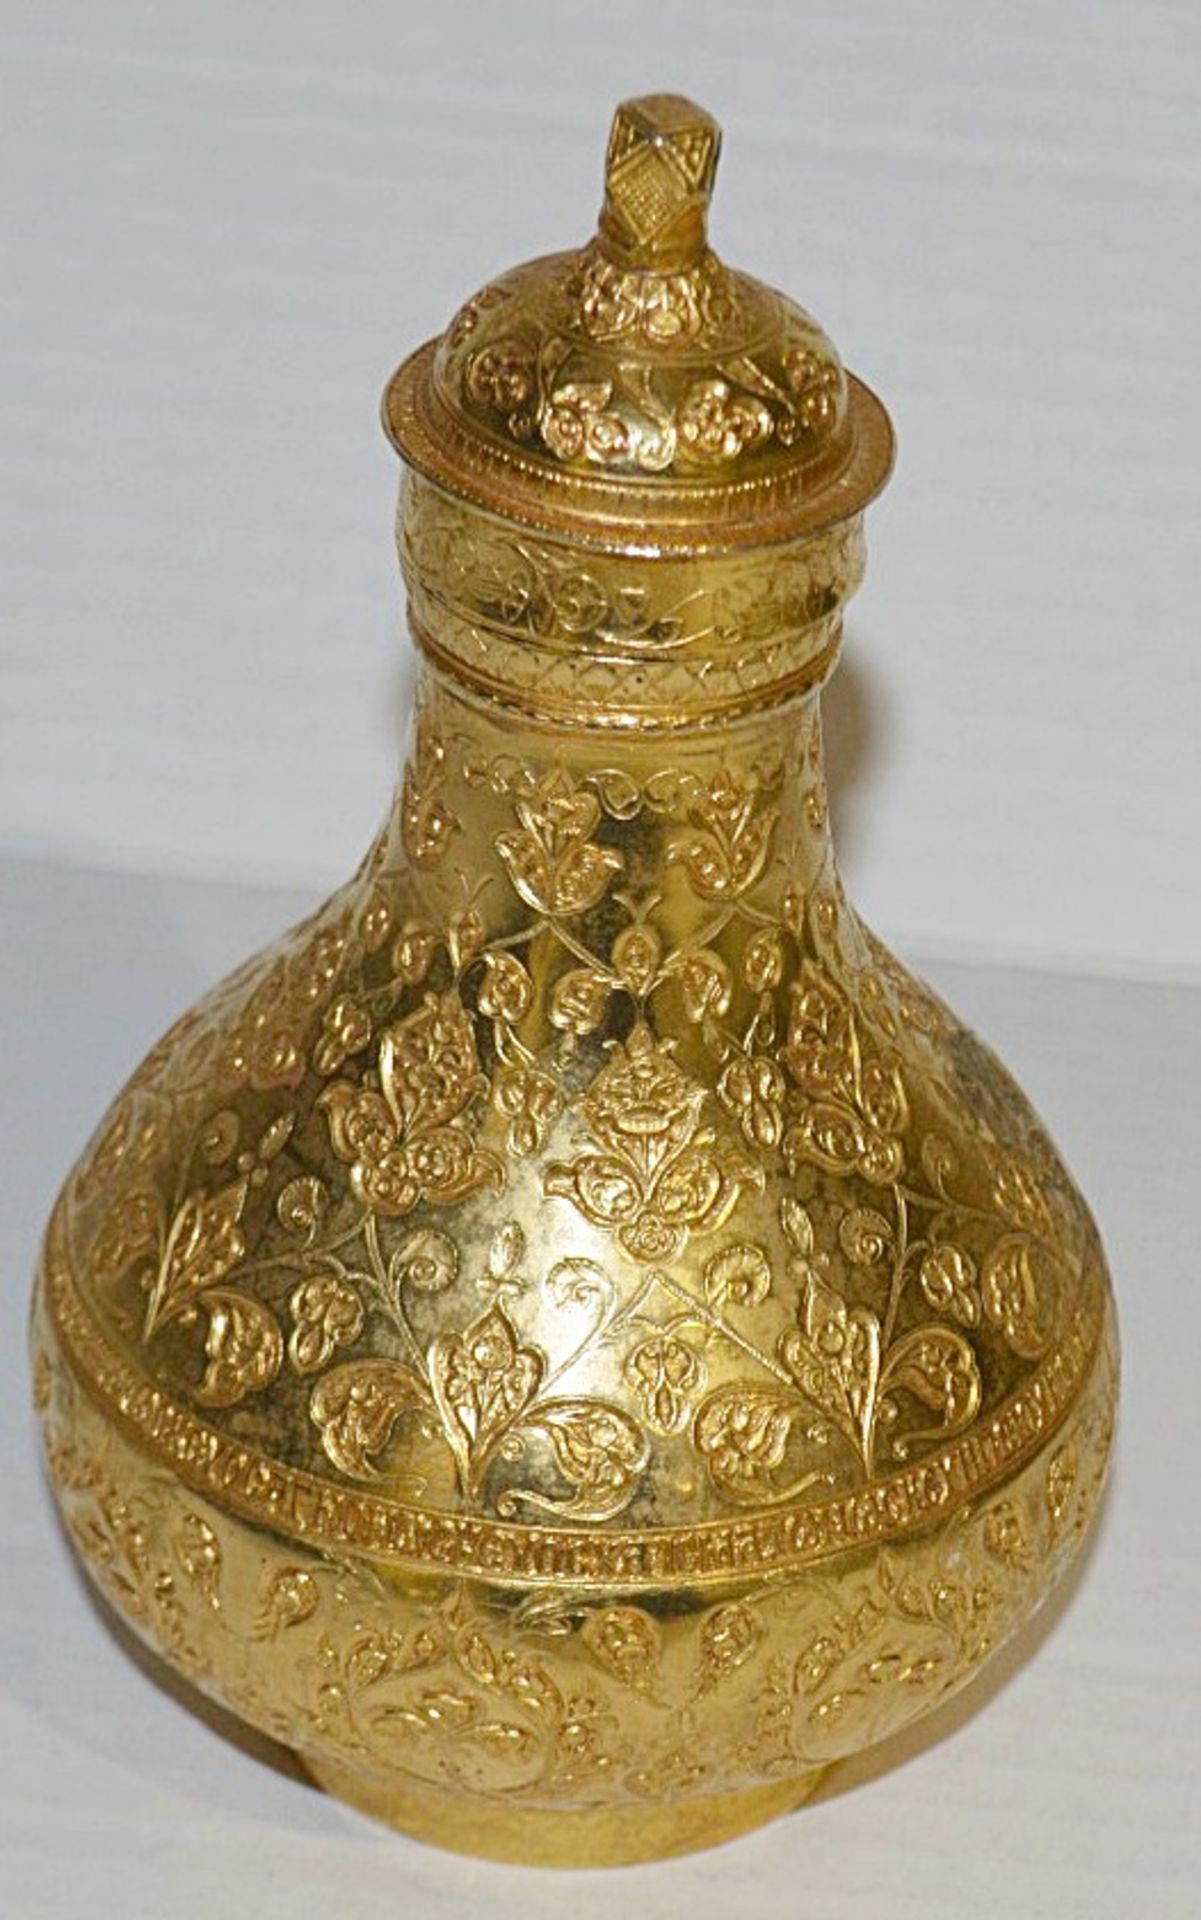 1 x Byzantine Holy Oil Flask - Benaki Museum Replica In Gilt Metal - Hand Engraved Details On The - Image 2 of 6